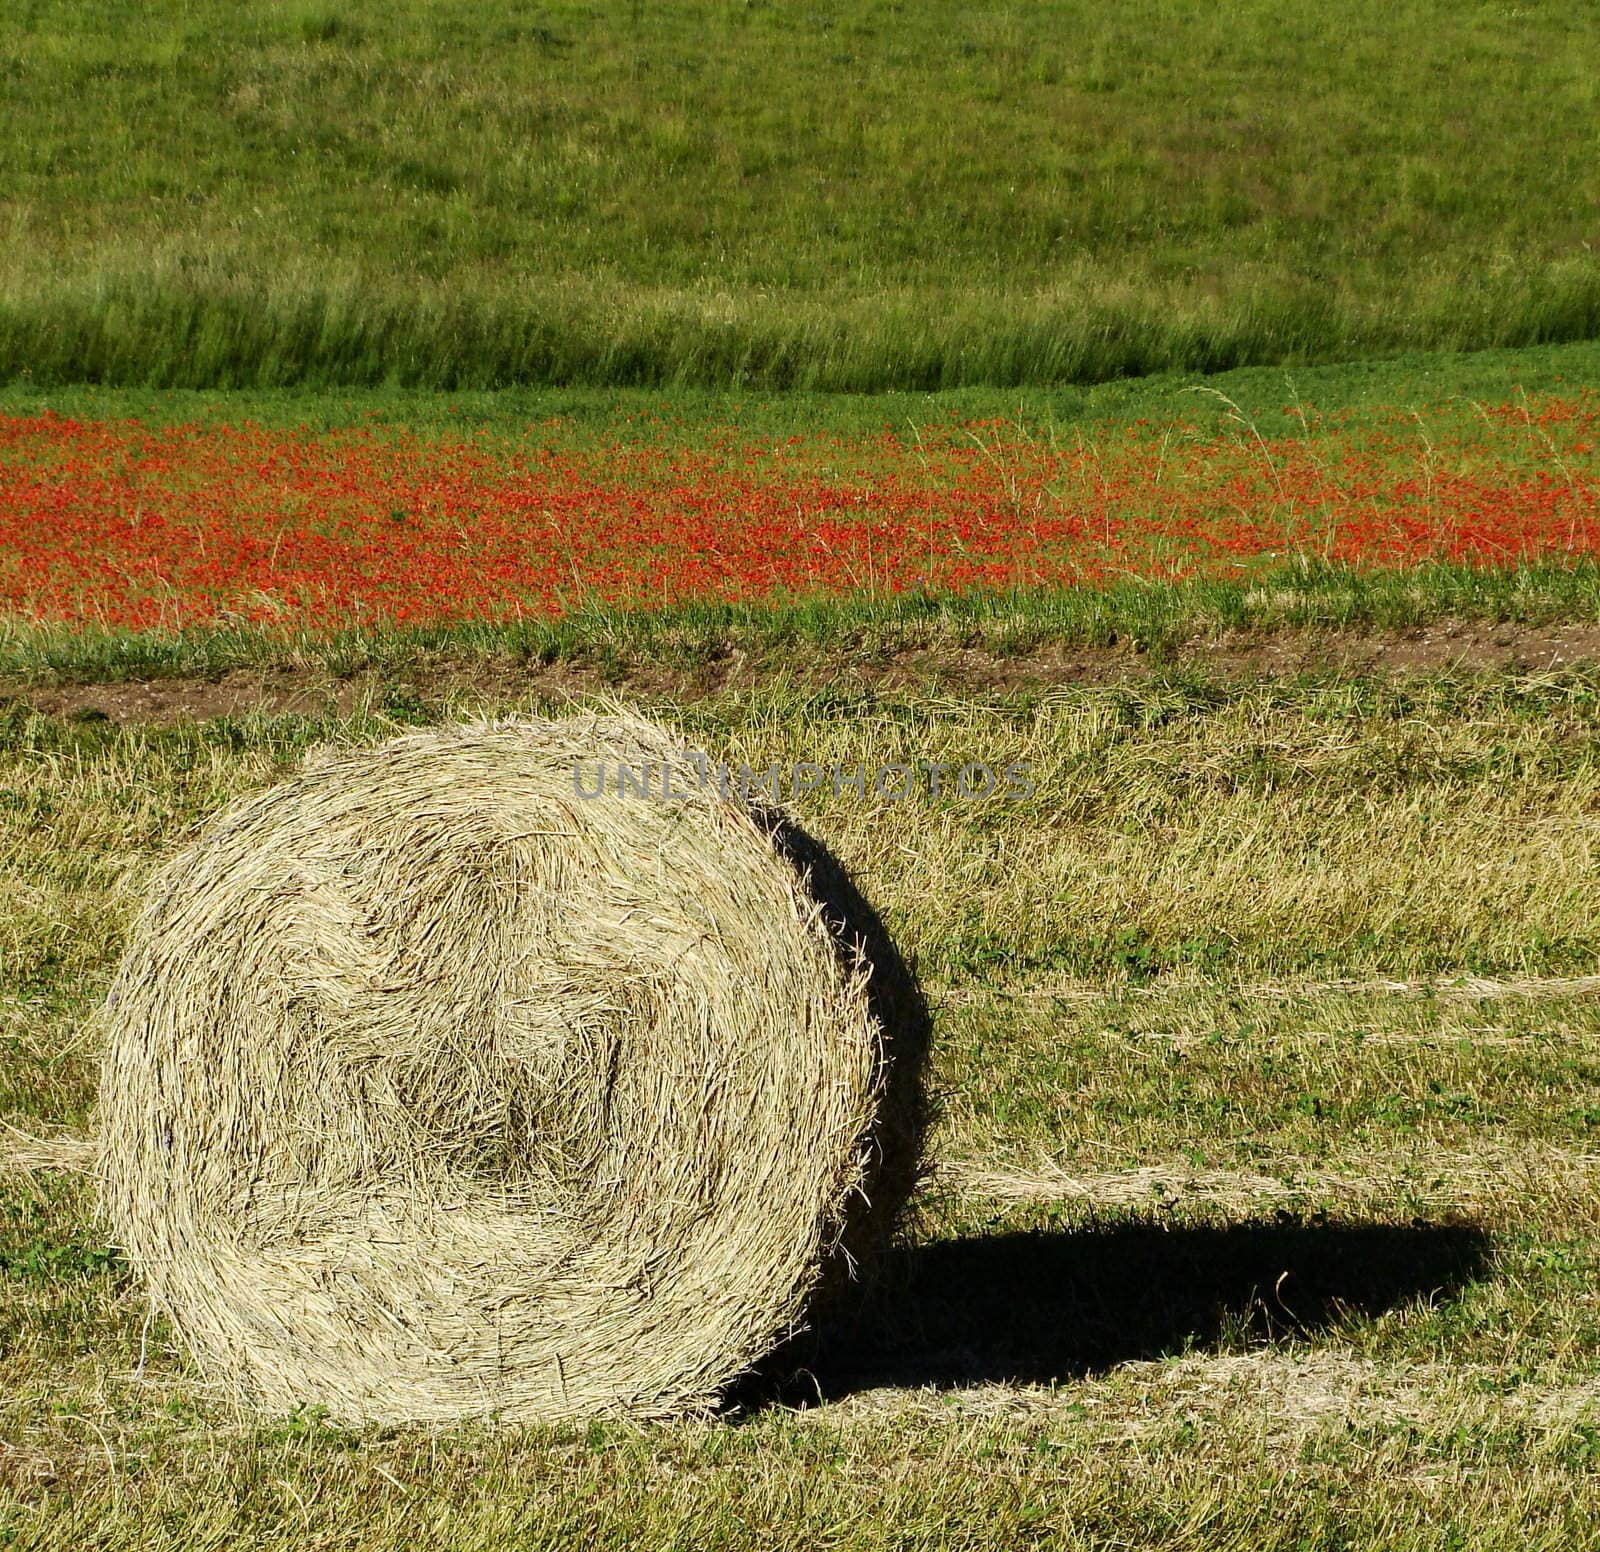 Bale of straw and its shape on the filed in the early morning light on the background wild red poppies National Park of Monti Sibillini near Castelluccio of Norcia village